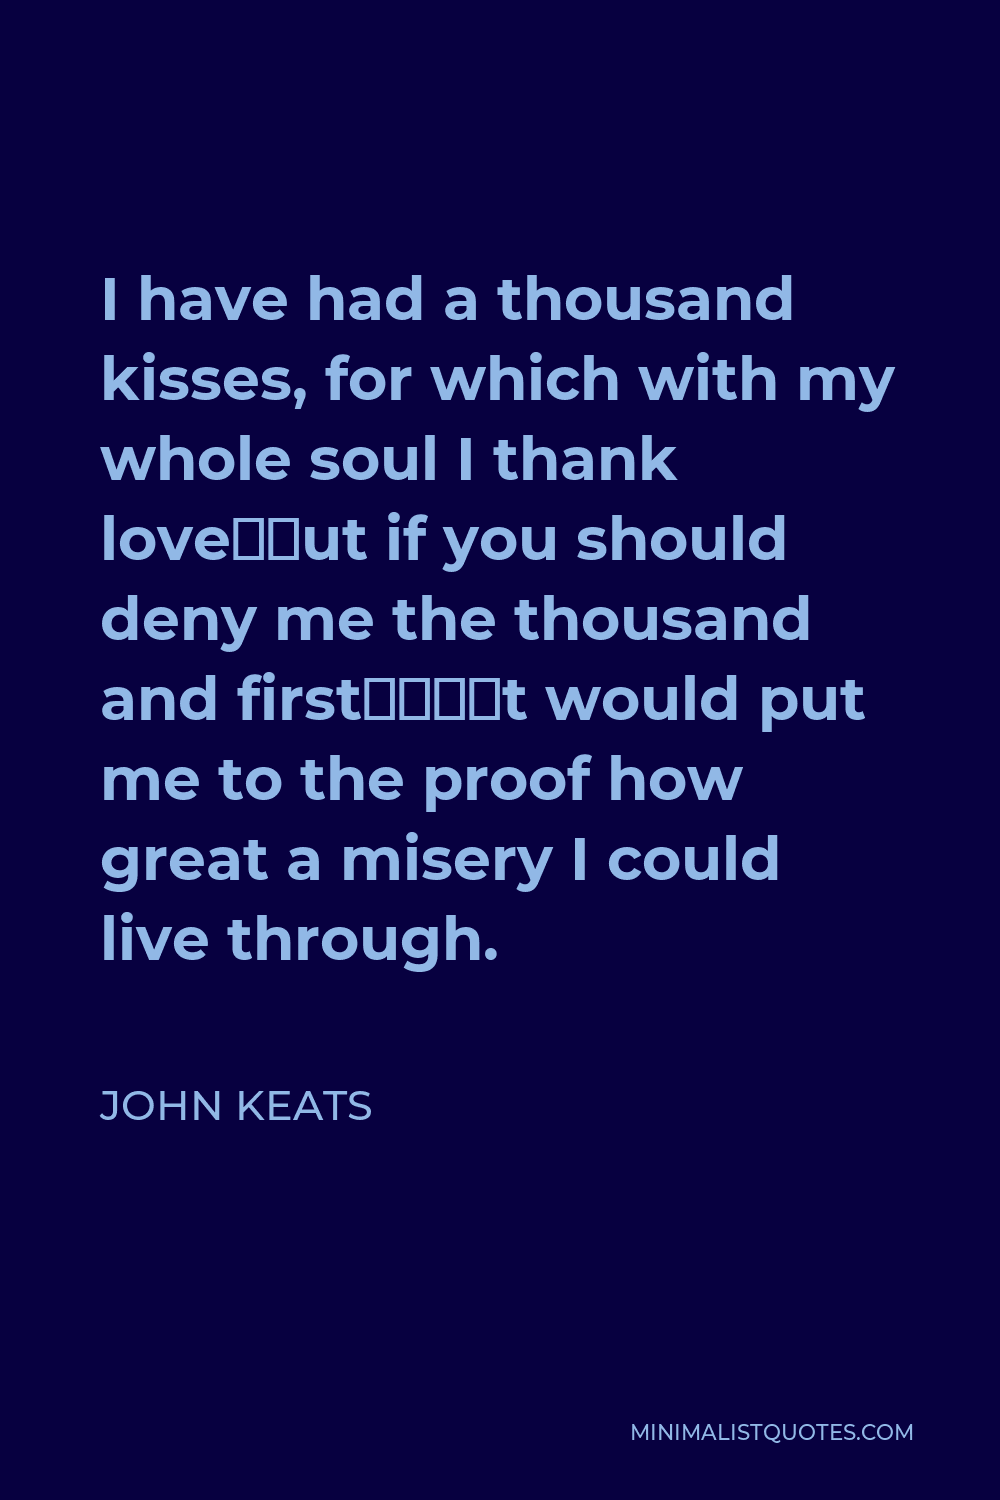 John Keats Quote - I have had a thousand kisses, for which with my whole soul I thank love—but if you should deny me the thousand and first—‘t would put me to the proof how great a misery I could live through.